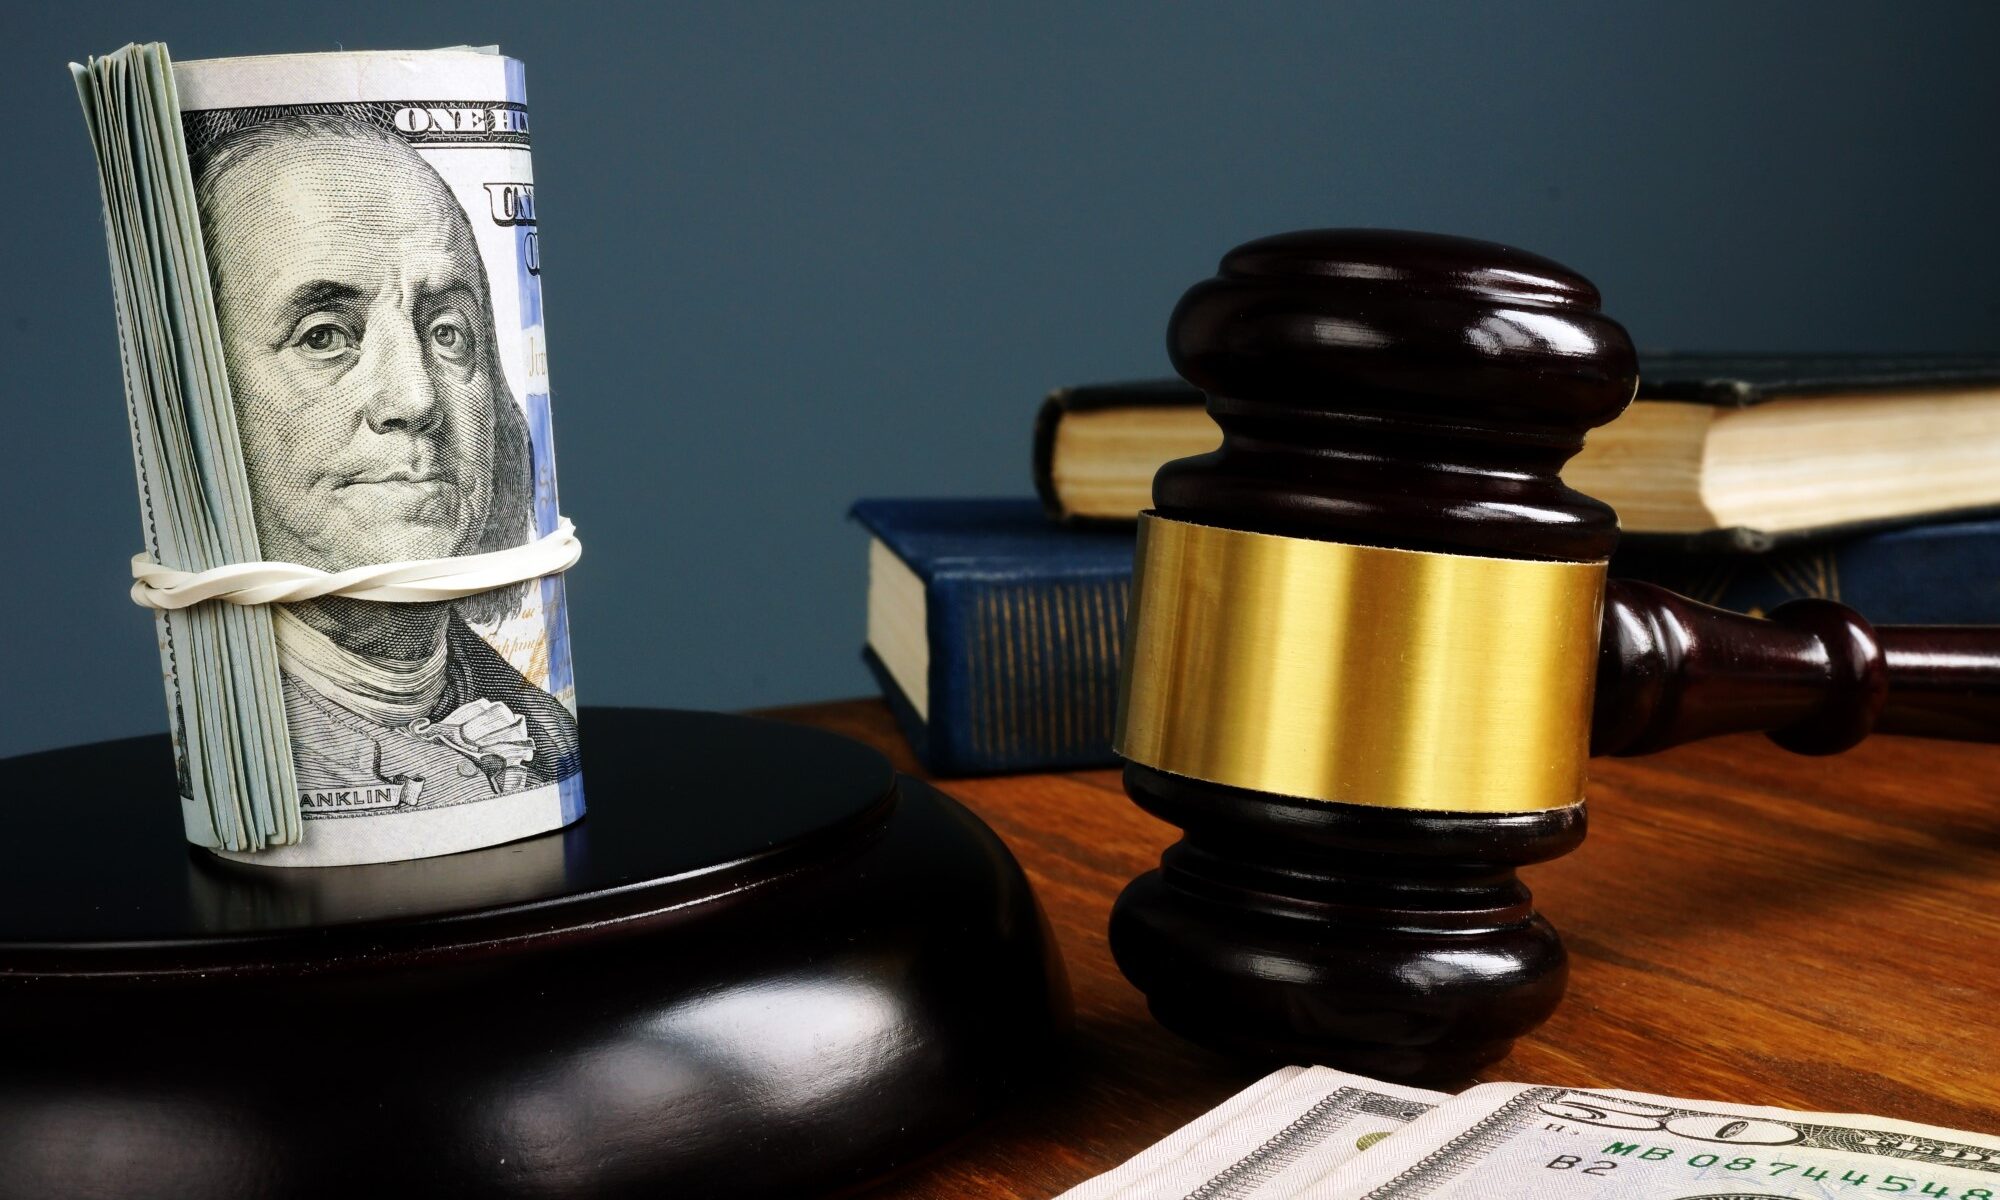 A wad of cash, books, and gavel as collateral for a bail bond